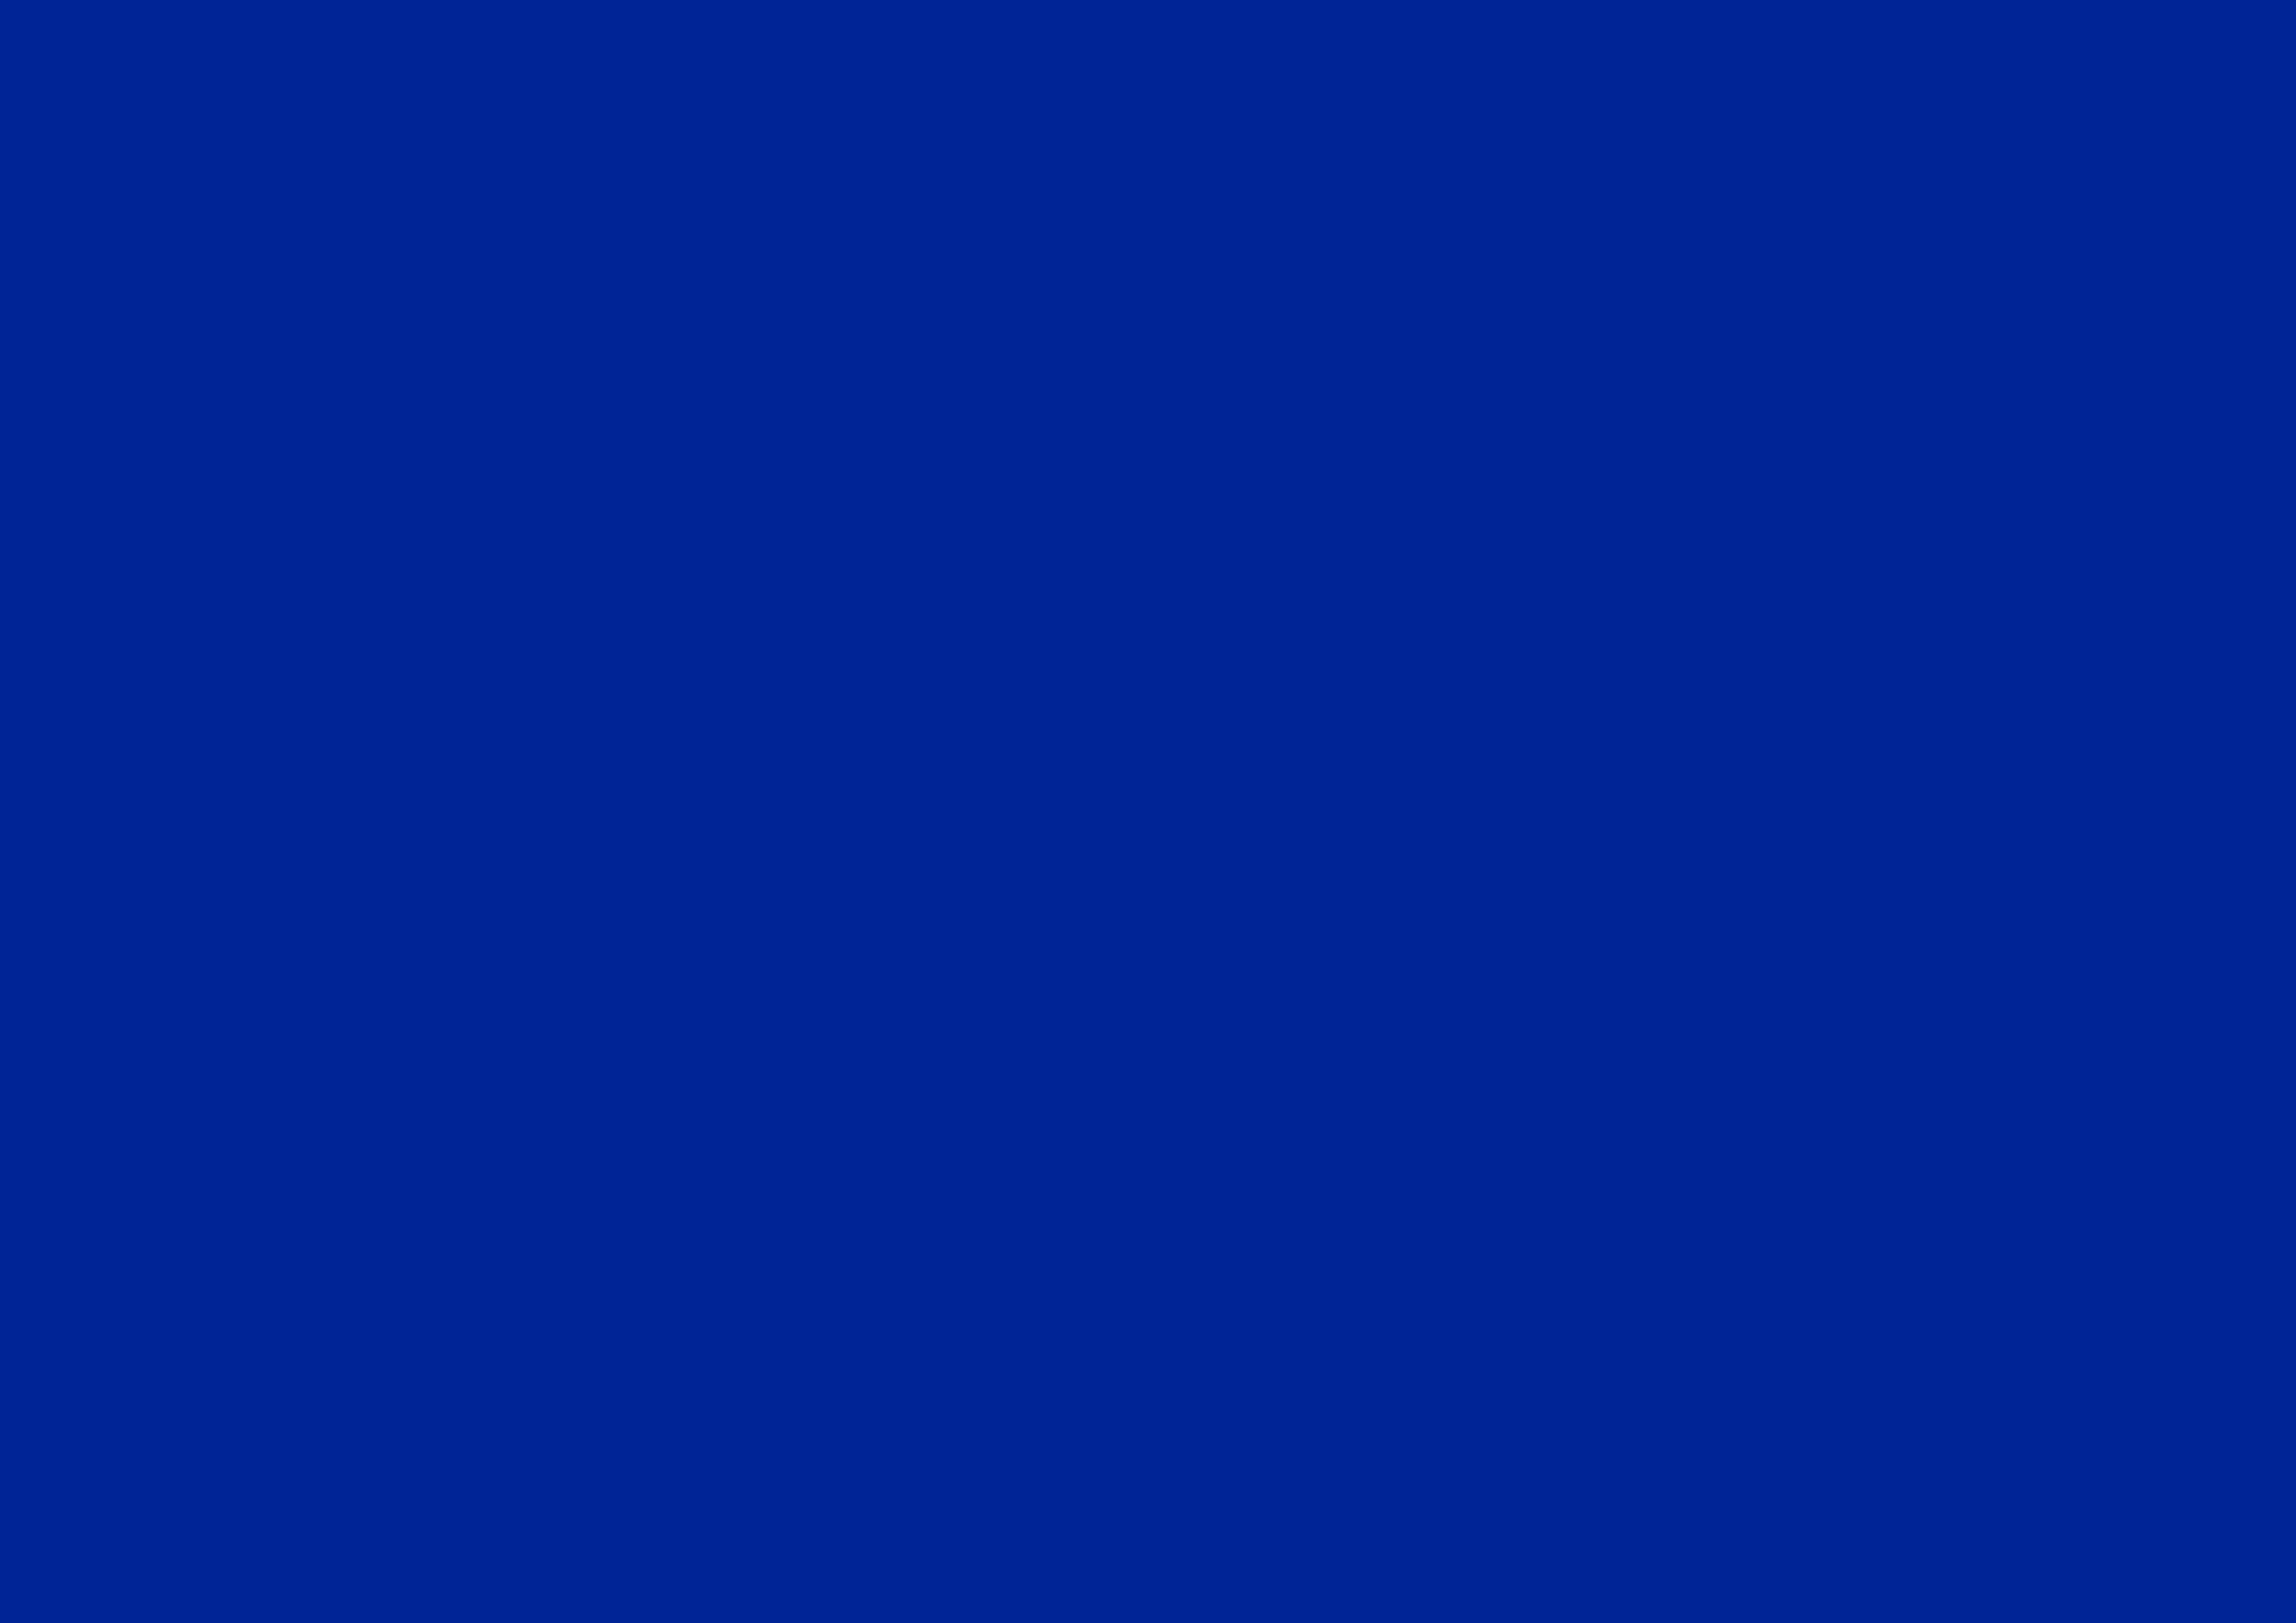 3508x2480 Imperial Blue Solid Color Background